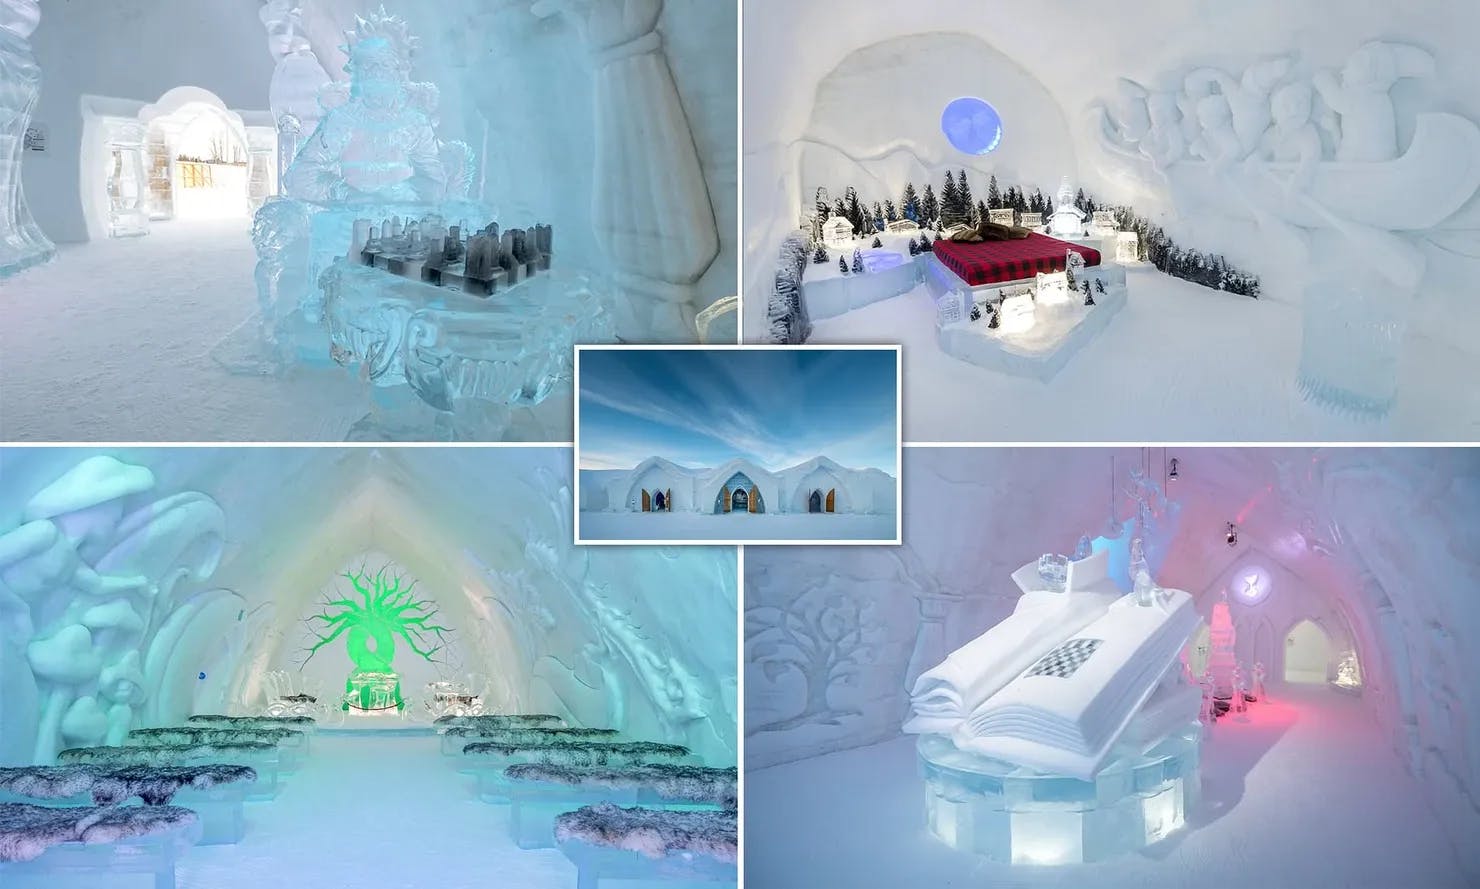 Glace Ice Hotel in Quebec City, Canada